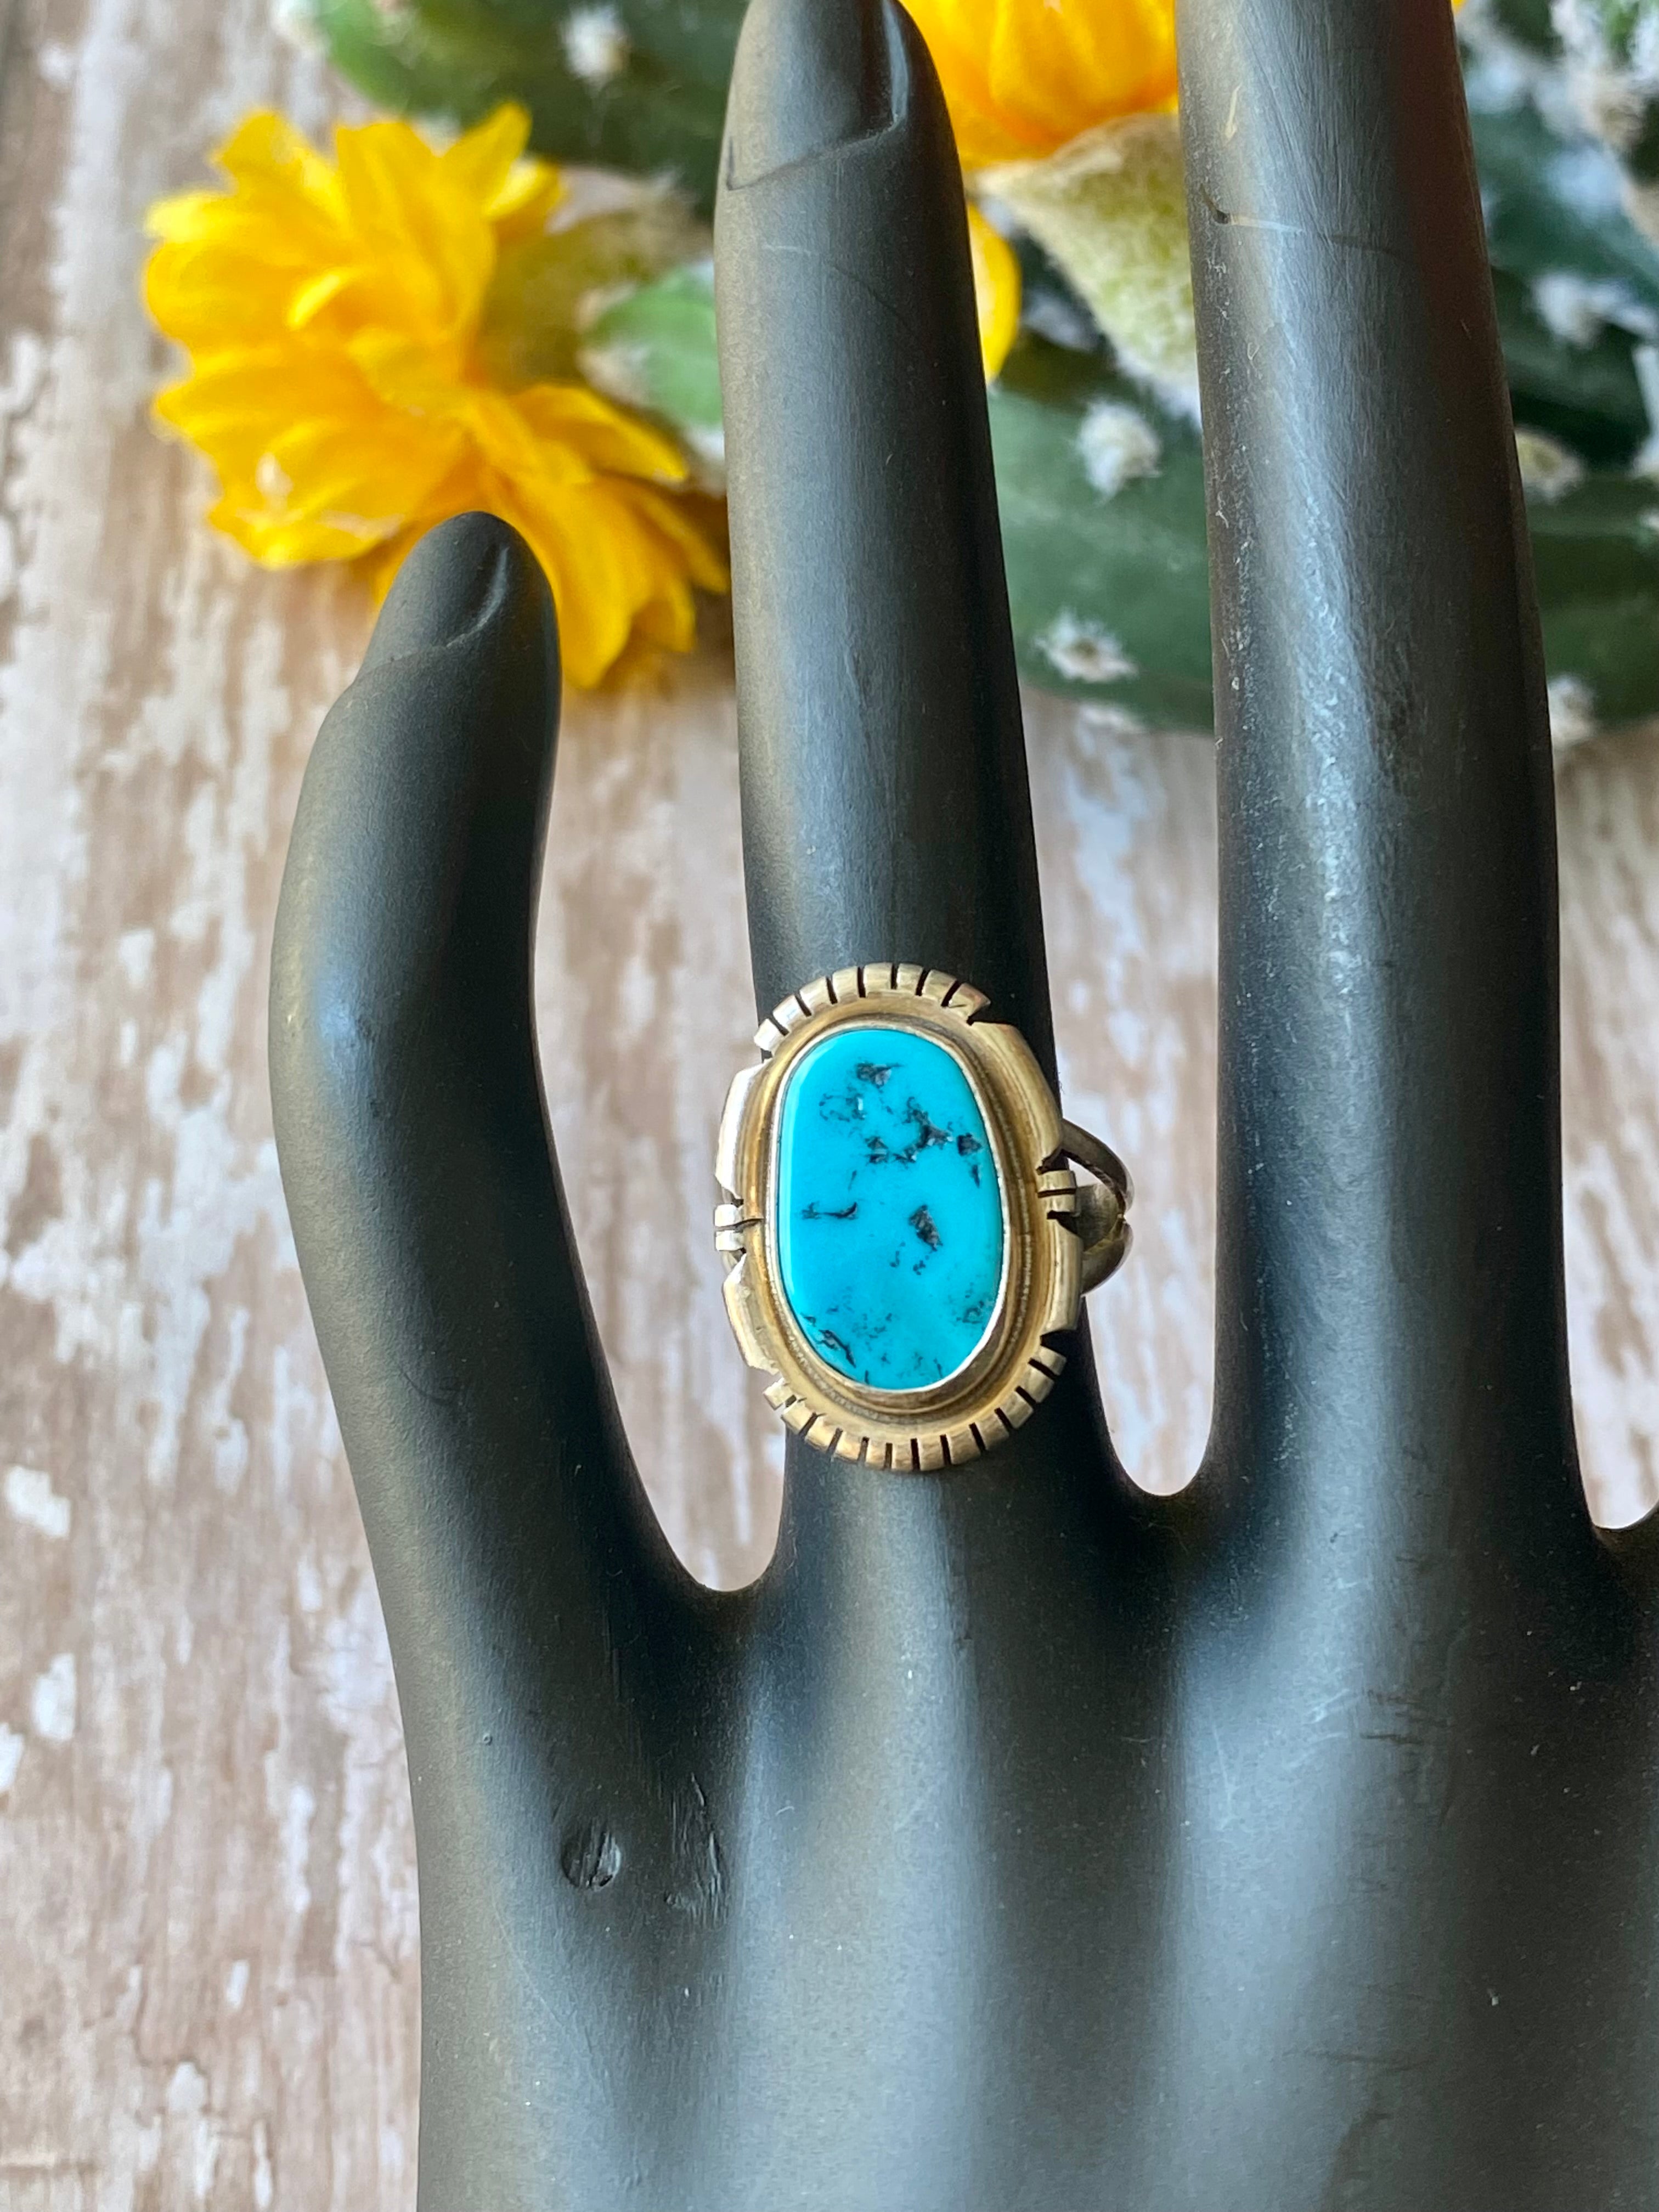 Eli Skeets Sleeping Beauty Turquoise & Sterling Silver Ring Size 4.75